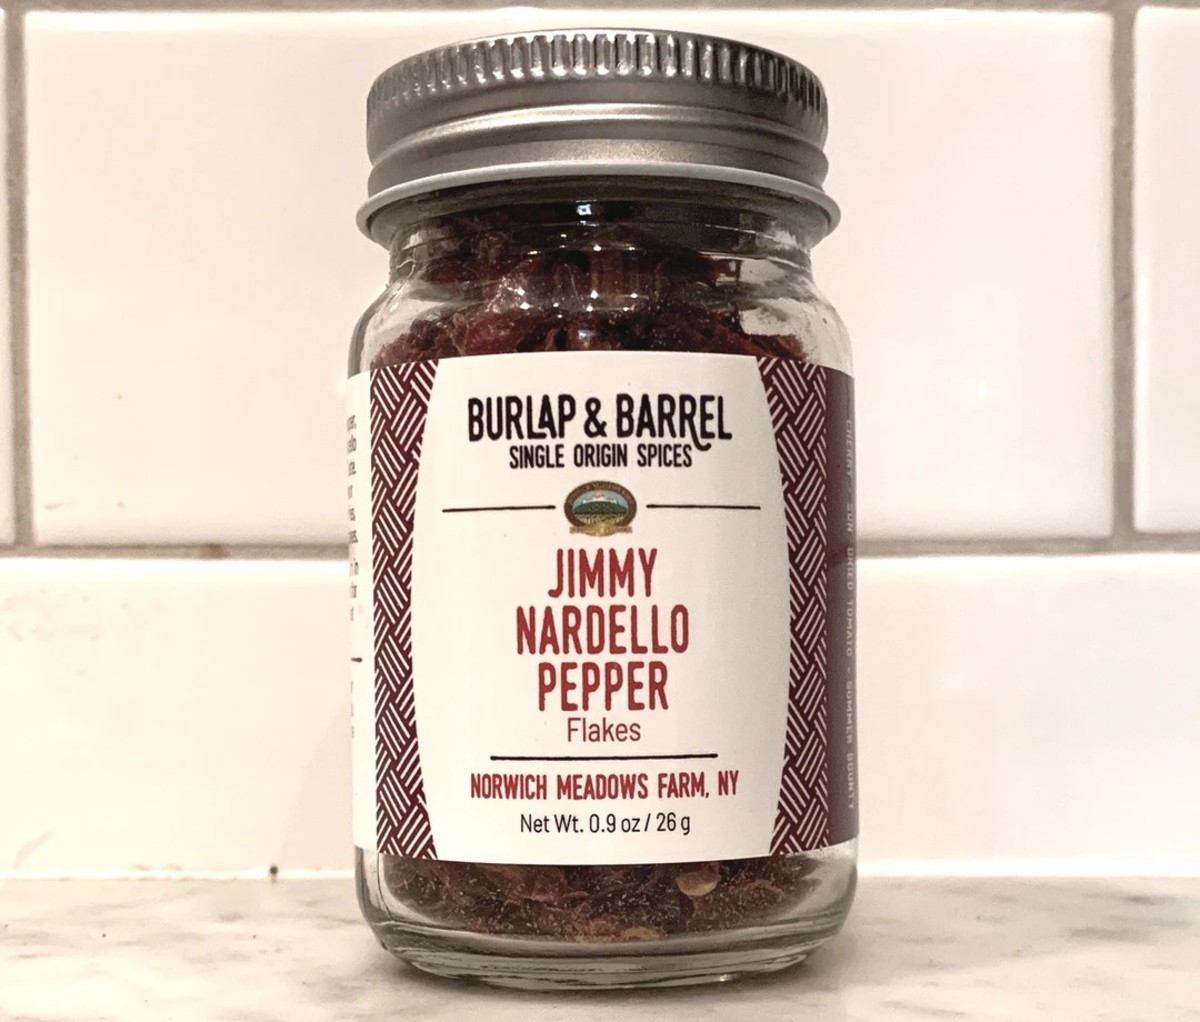 Jar of Burlap & Barrel Jimmy Nardello Pepper Flakes on a white counter